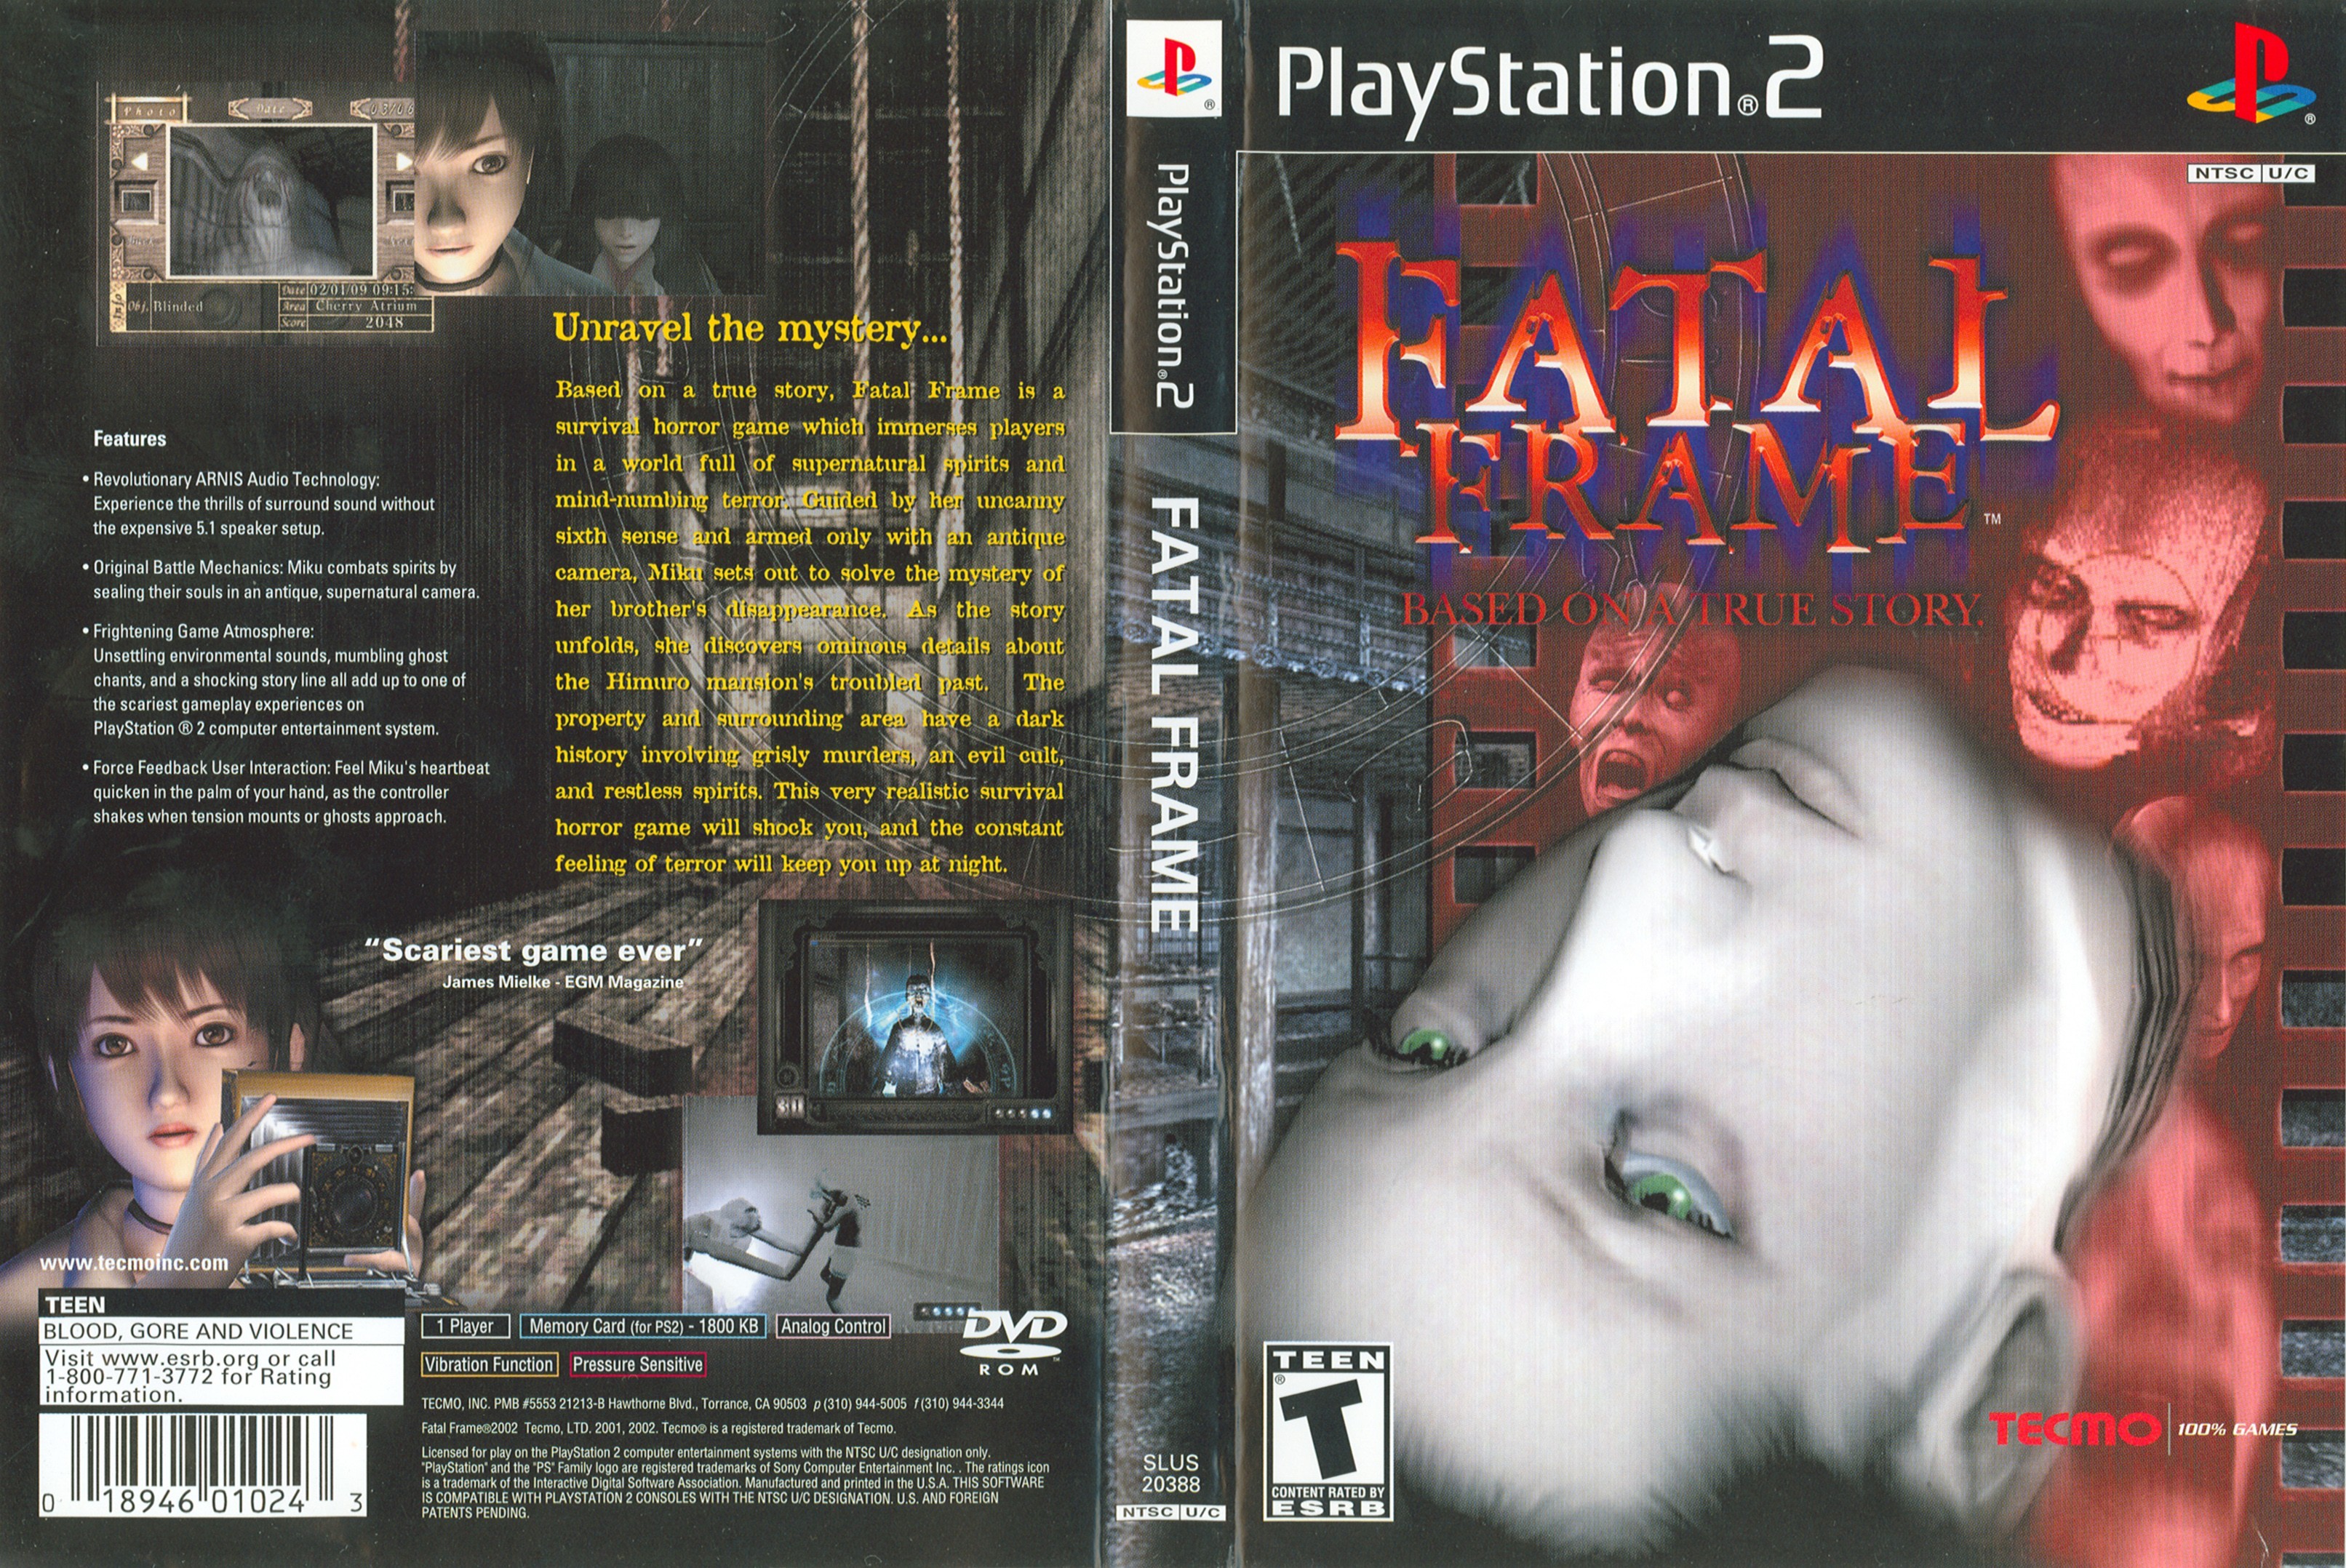 download fatal frame maiden of black water pc download